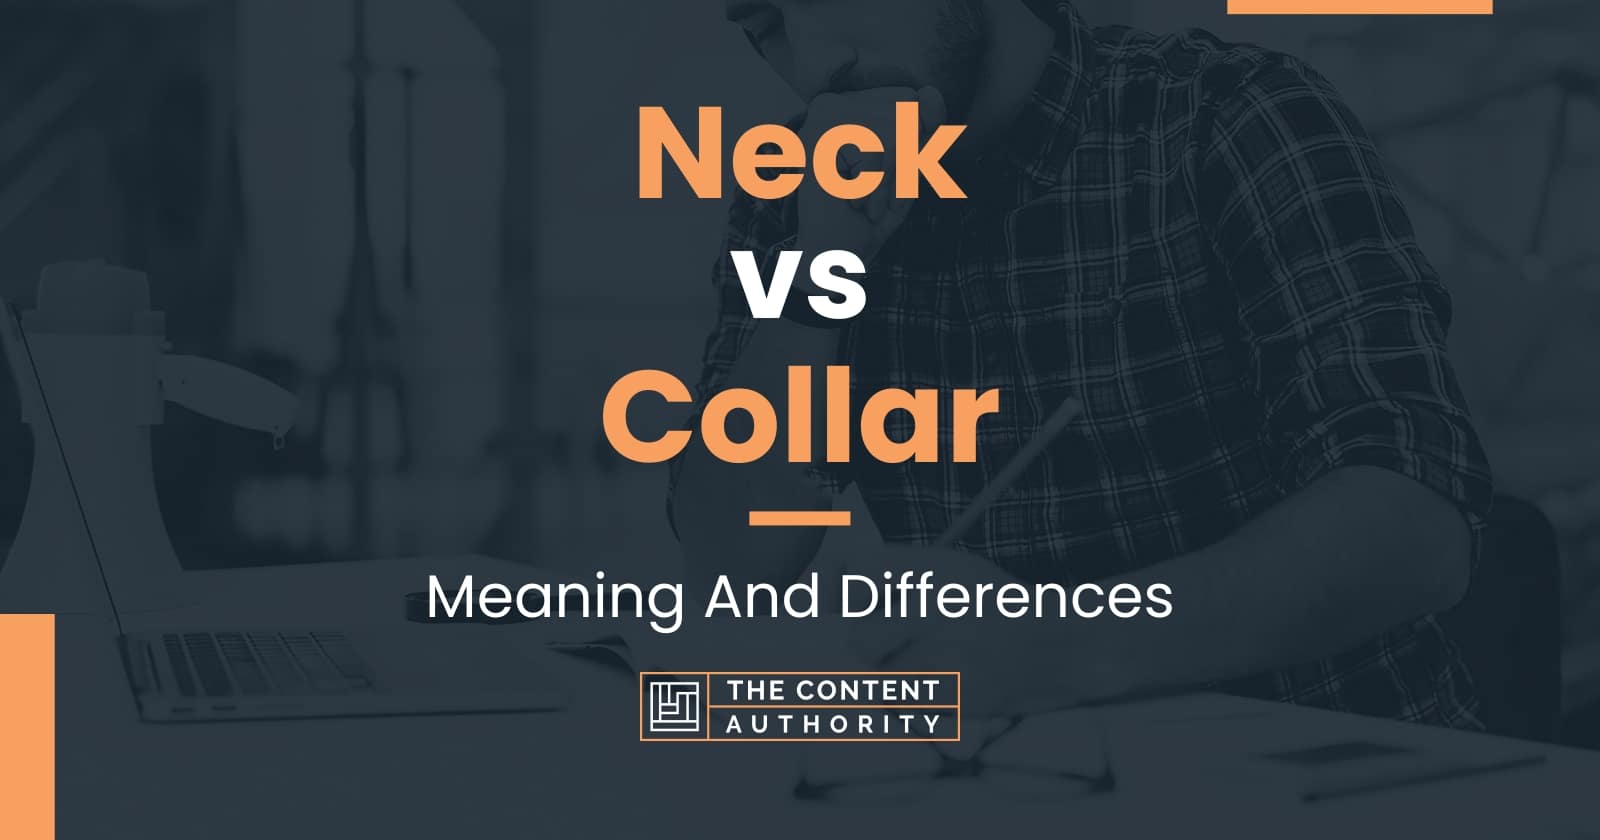 Neck vs Collar: Meaning And Differences